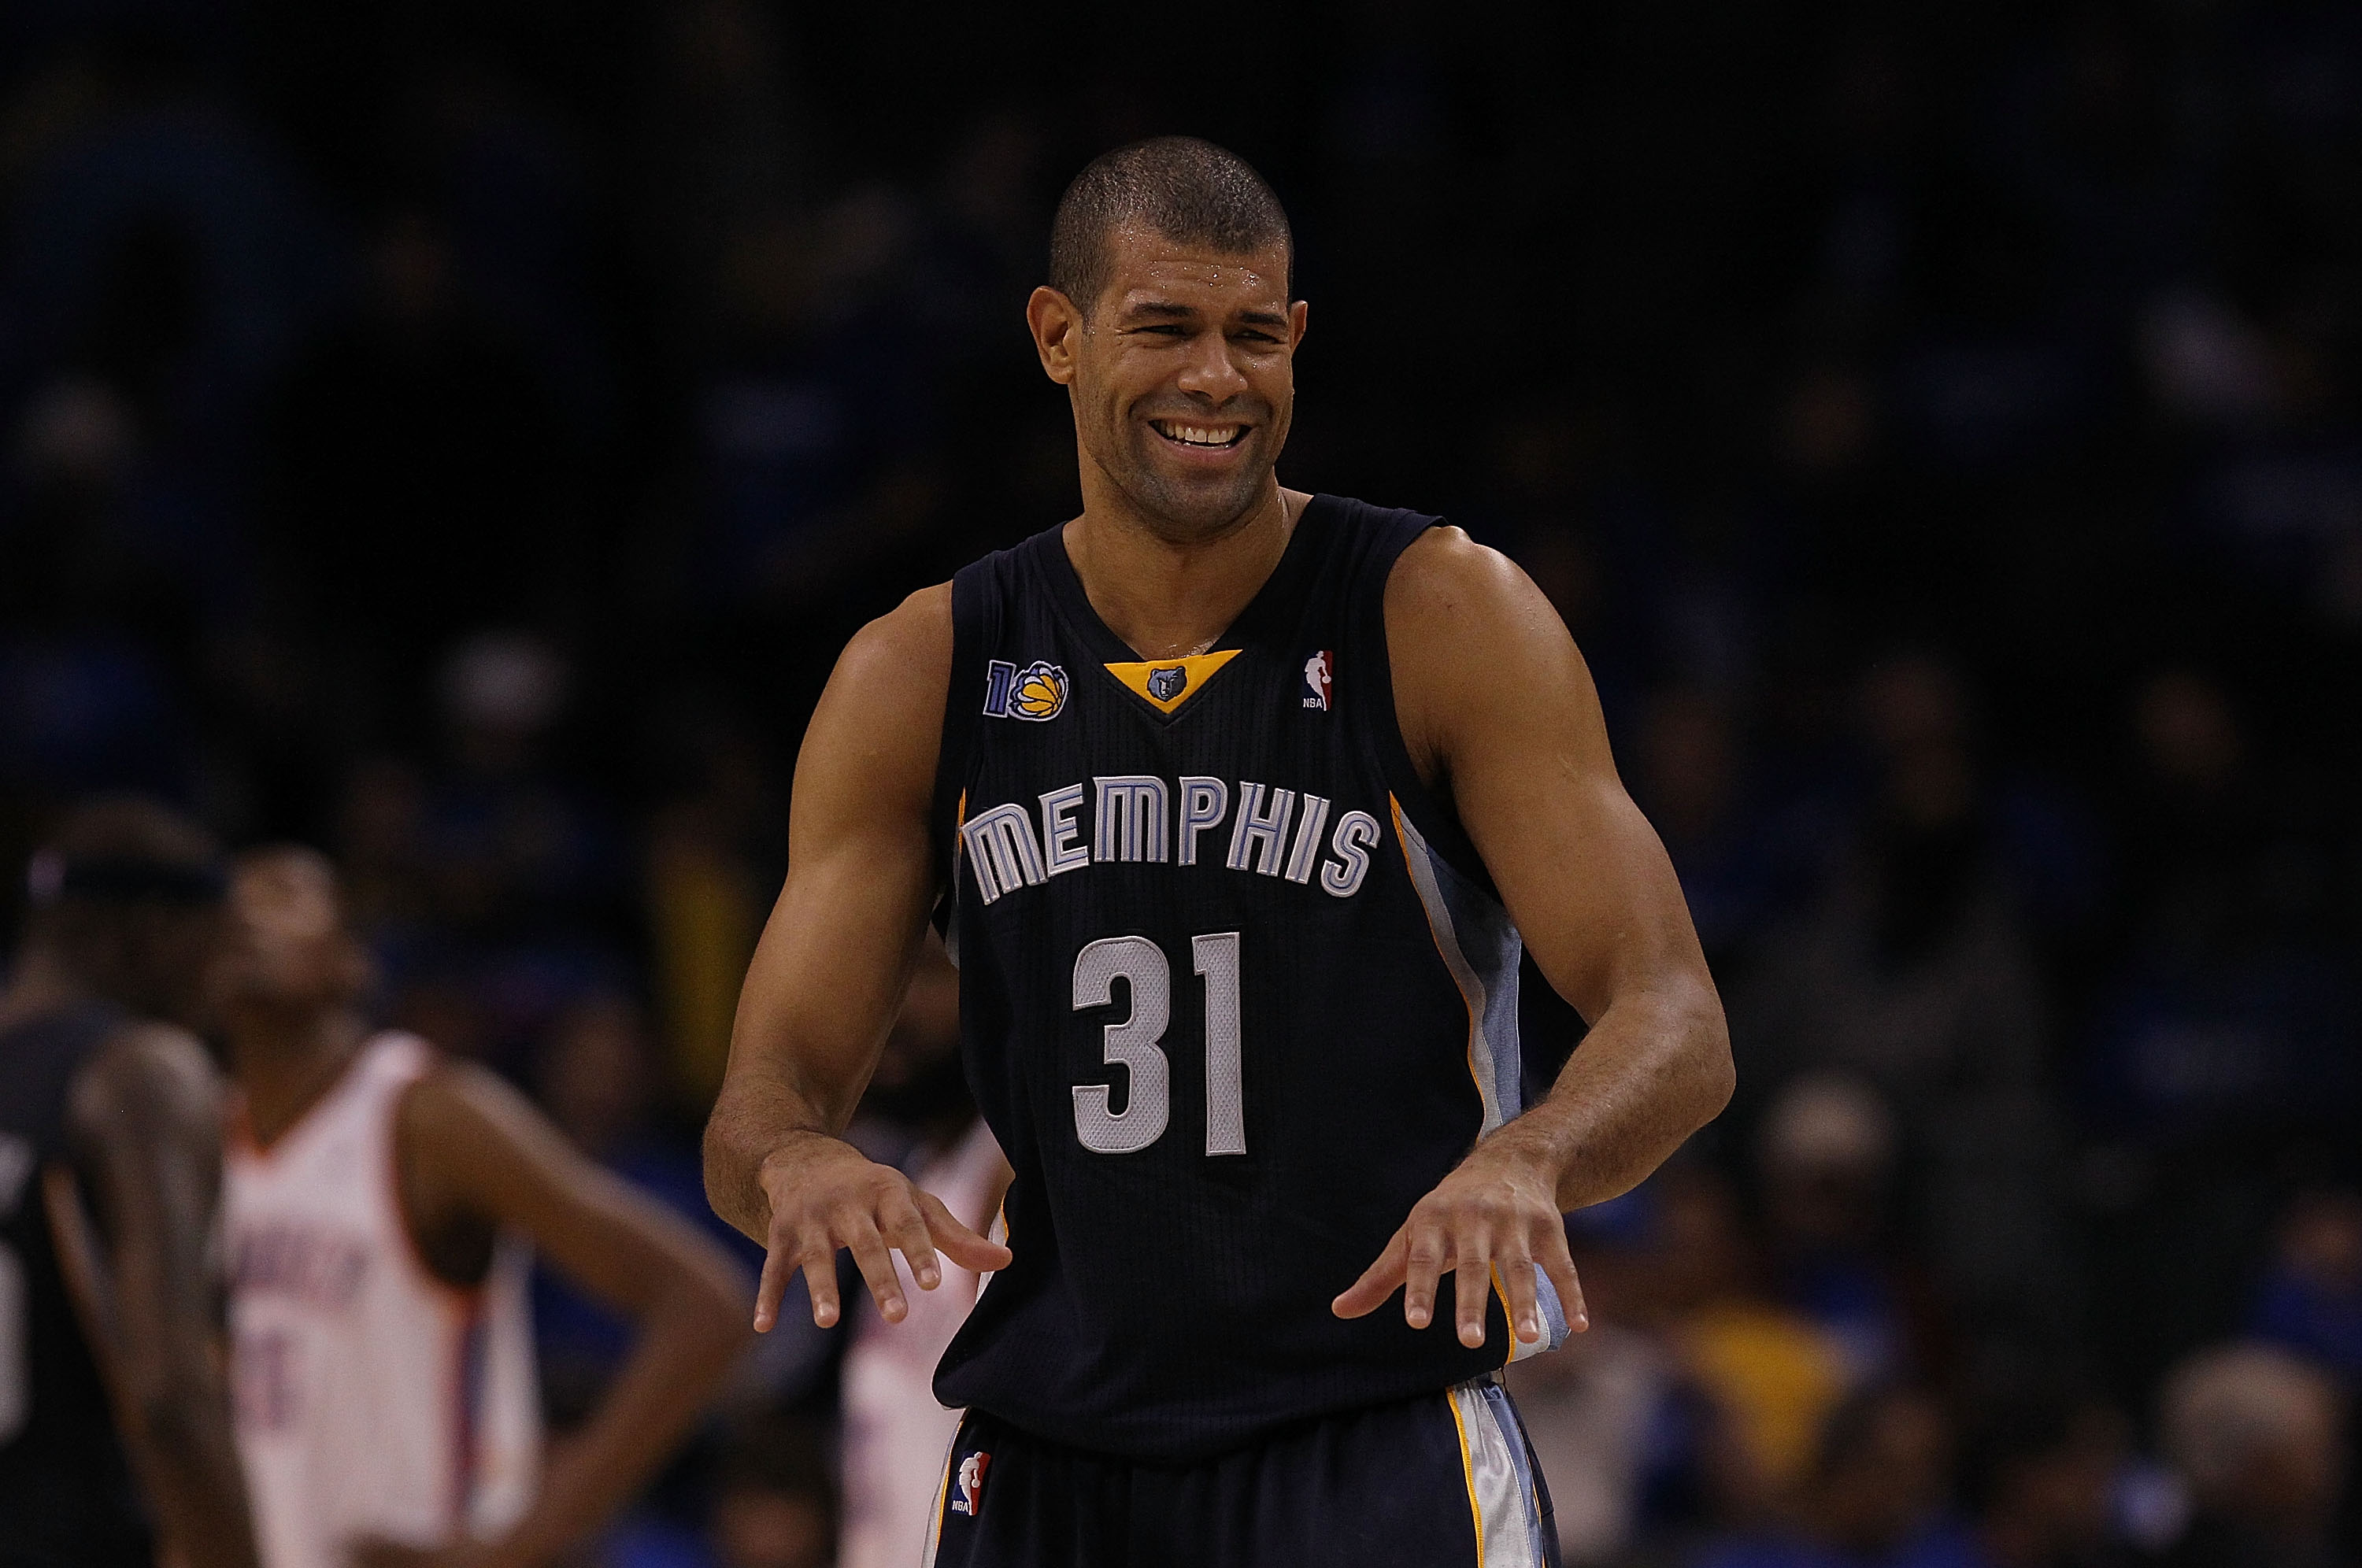 OKLAHOMA CITY, OK - MAY 01:  Forward Shane Battier #31 of the Memphis Grizzlies reacts during a 114-101 win against the Oklahoma City Thunder in Game One of the Western Conference Semifinals in the 2011 NBA Playoffs on May 1, 2011 at Oklahoma City Arena i